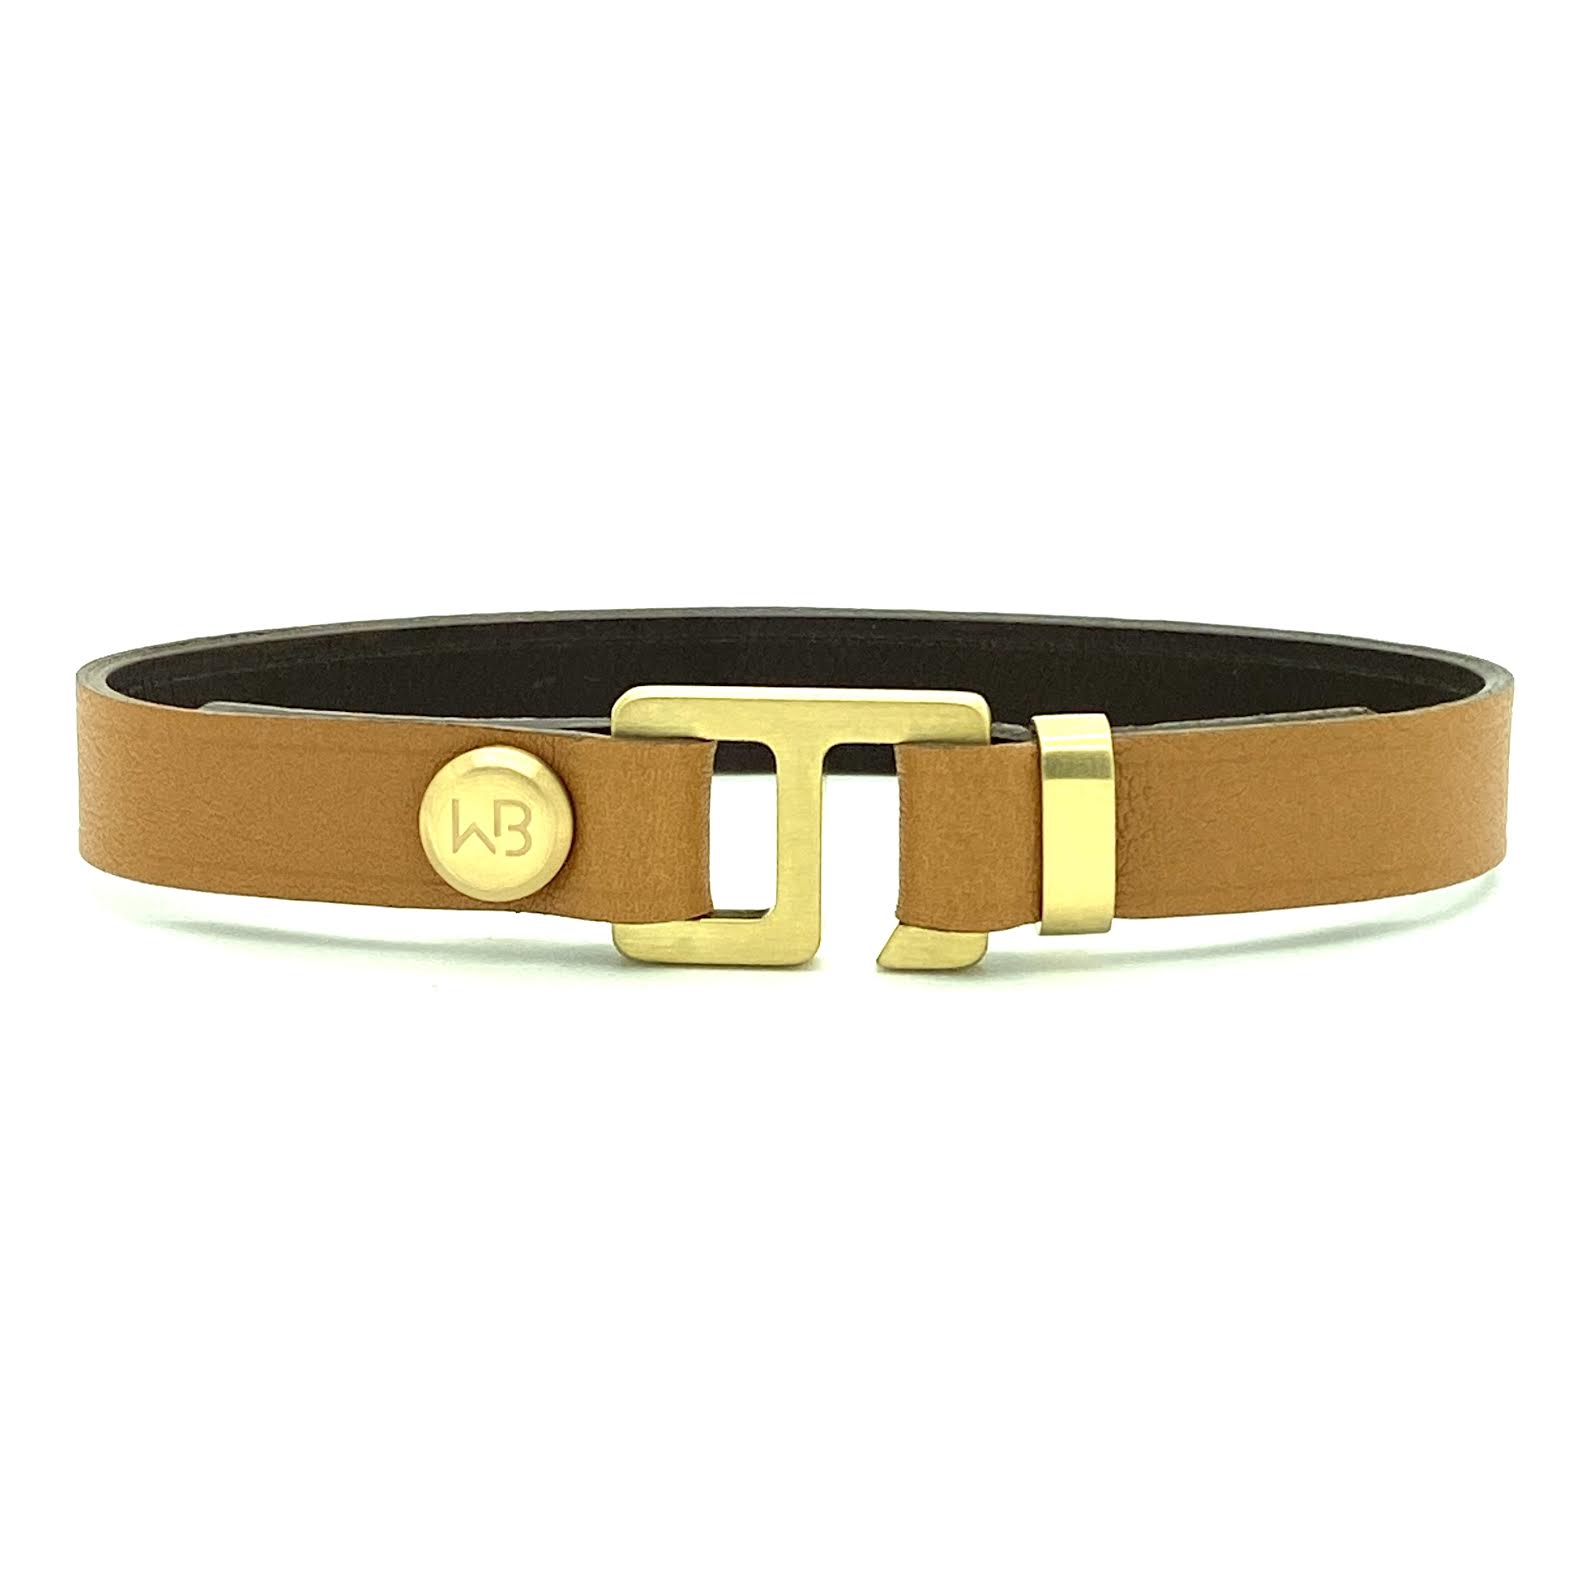 With a trendy, cool modern vibe, this tan/dark brown Italian leather cuff bracelet is paired with your choice of brushed stainless steel, brass or black ceramic hardware. Our signature cuff bracelet is a modern staple for your WristBend collection. Made by WristBend